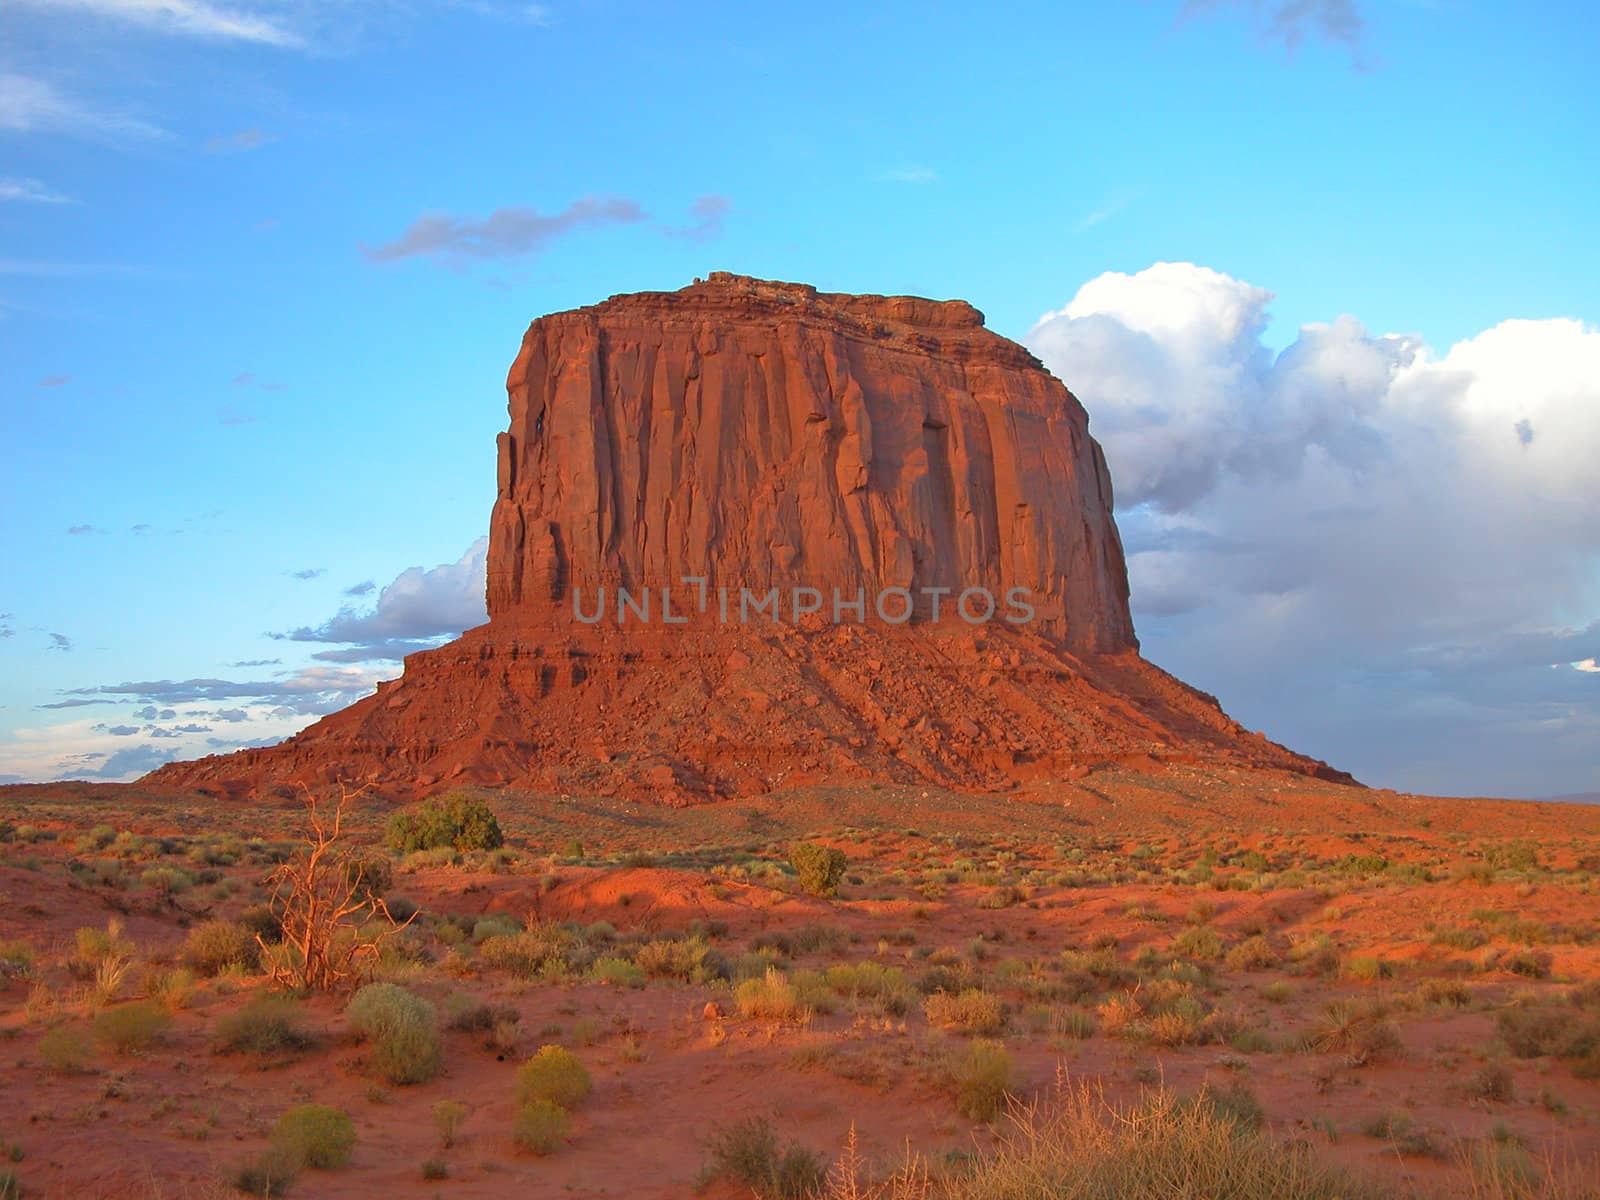 Summer sunset on a Monument Valley rock